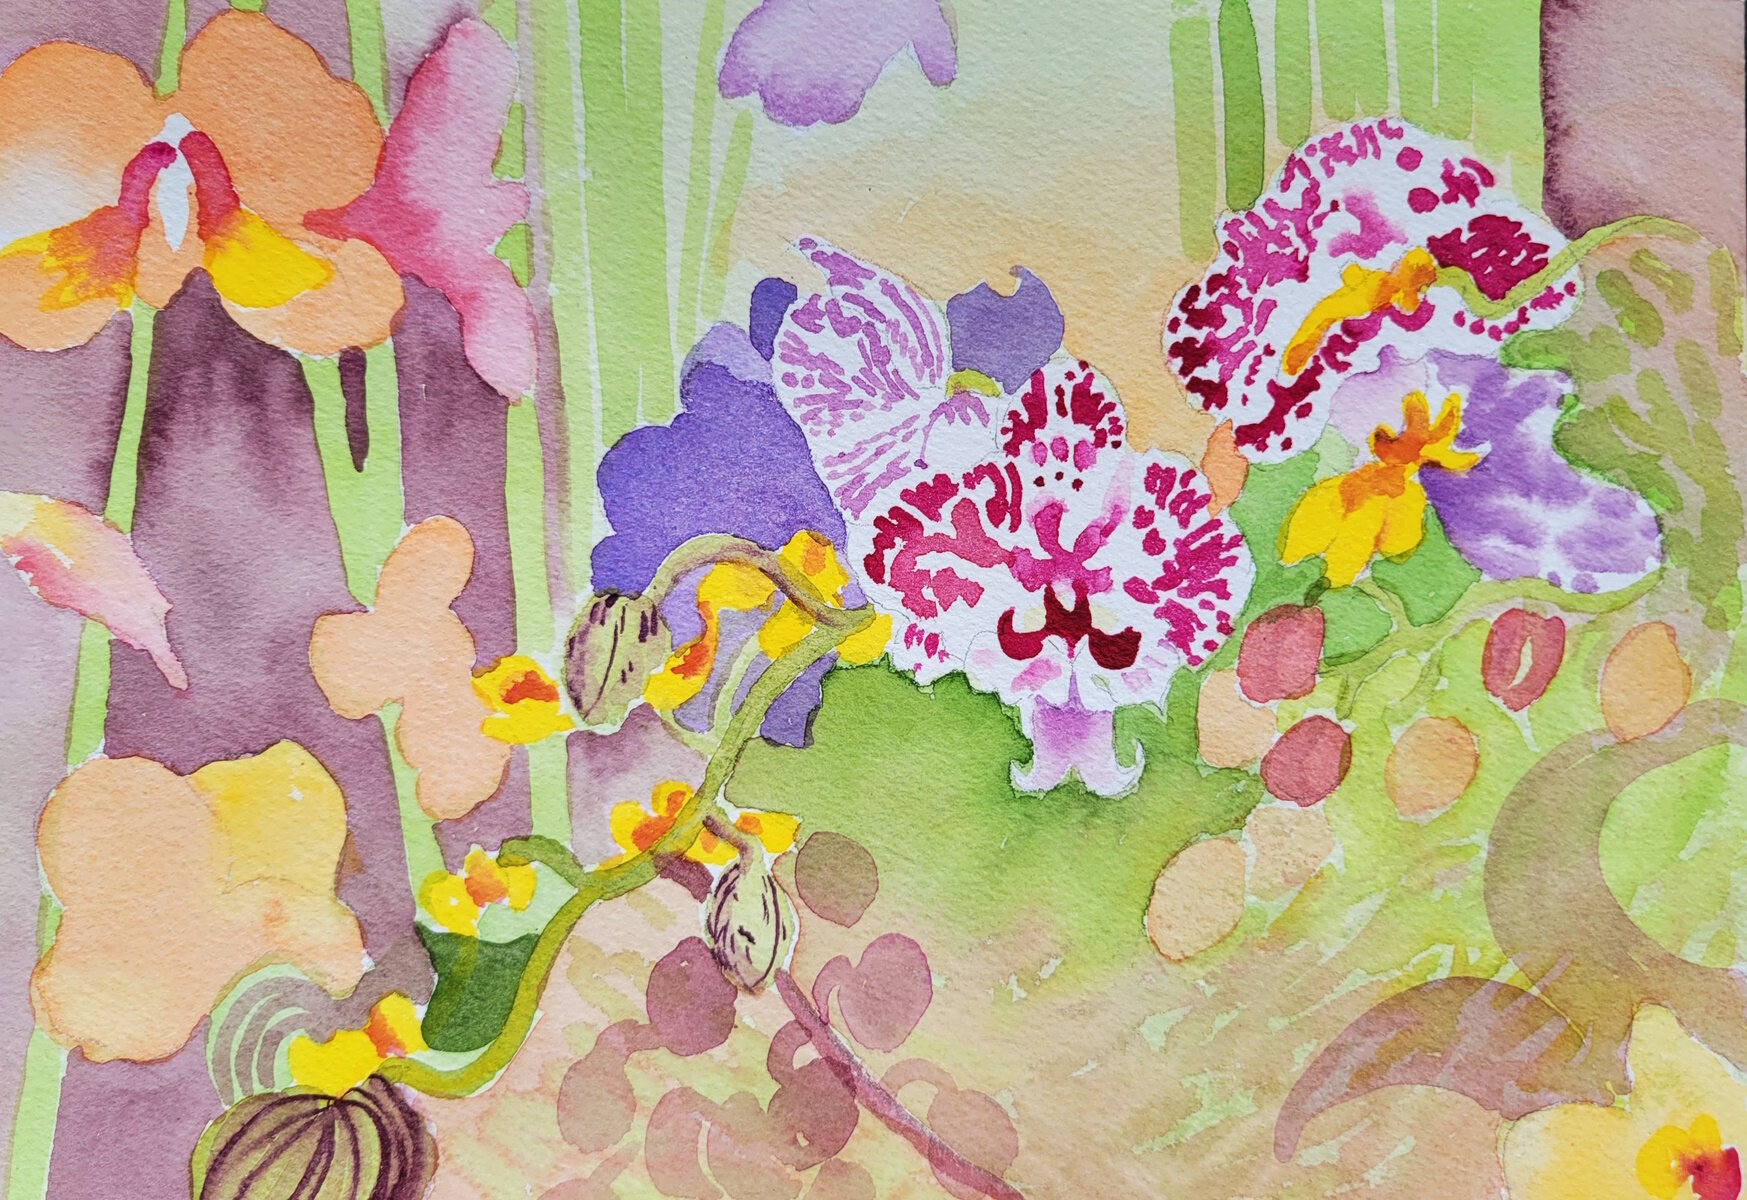 Orchids were the subject in my #chicagobotanicgarden watercolor and colored pencil drawing classes this week. I had fun rendering the same subject in two different media.  My next session starts mid-May! #coloredpencildrawing #botanicalart #chicagobo